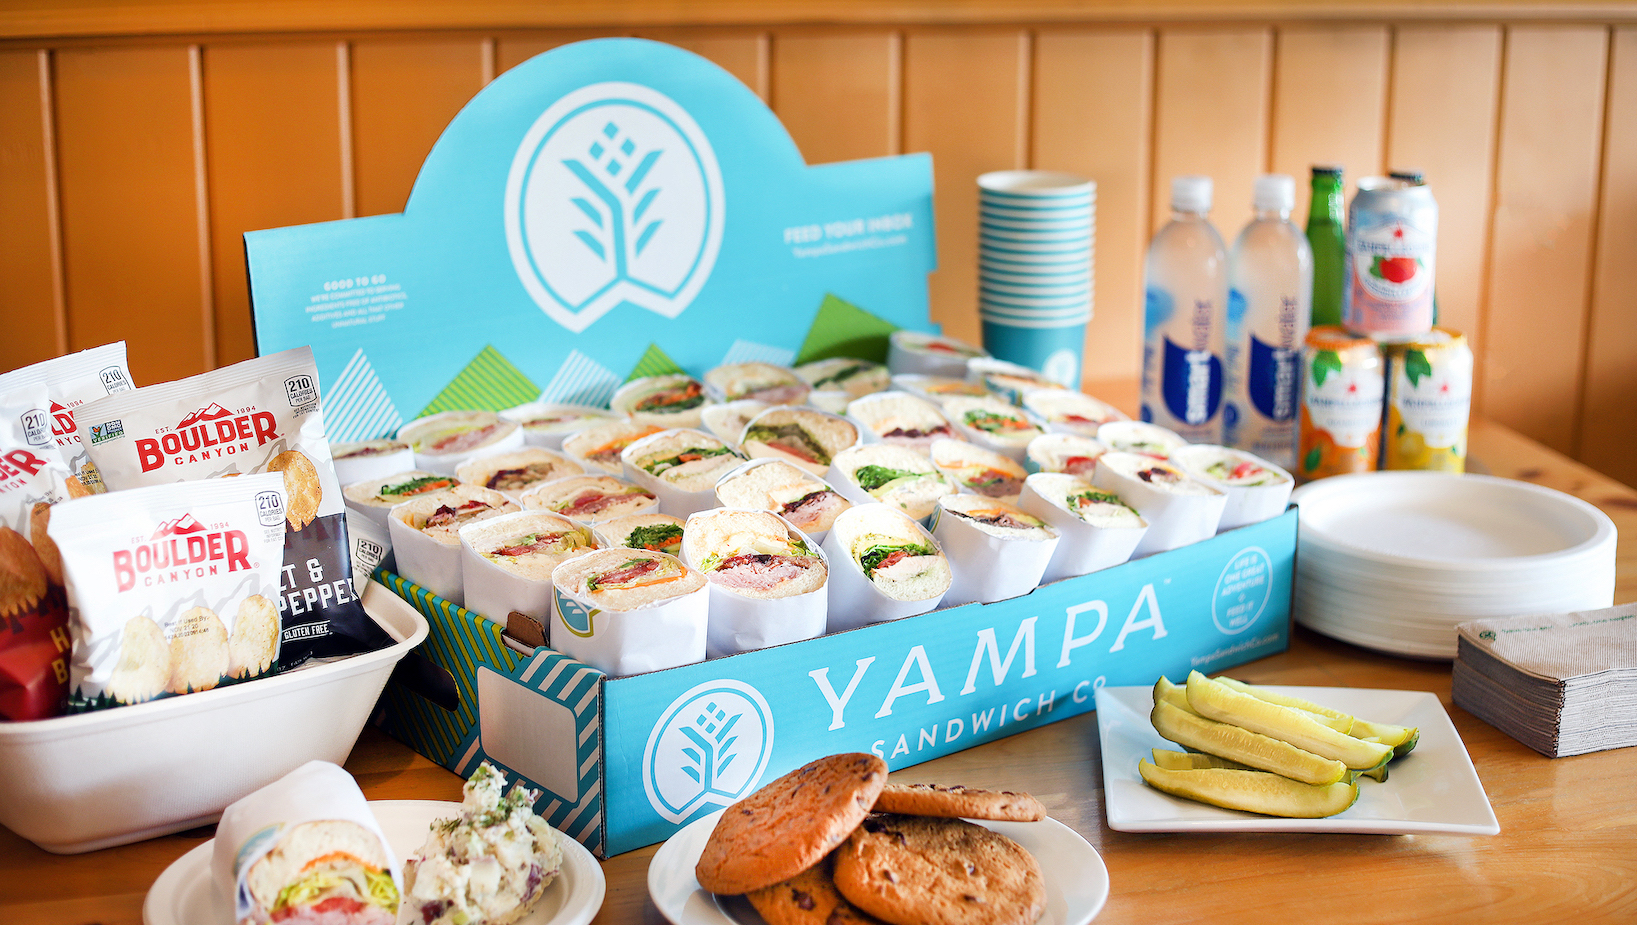 Catering Boxes at Yampa Sandwich Company